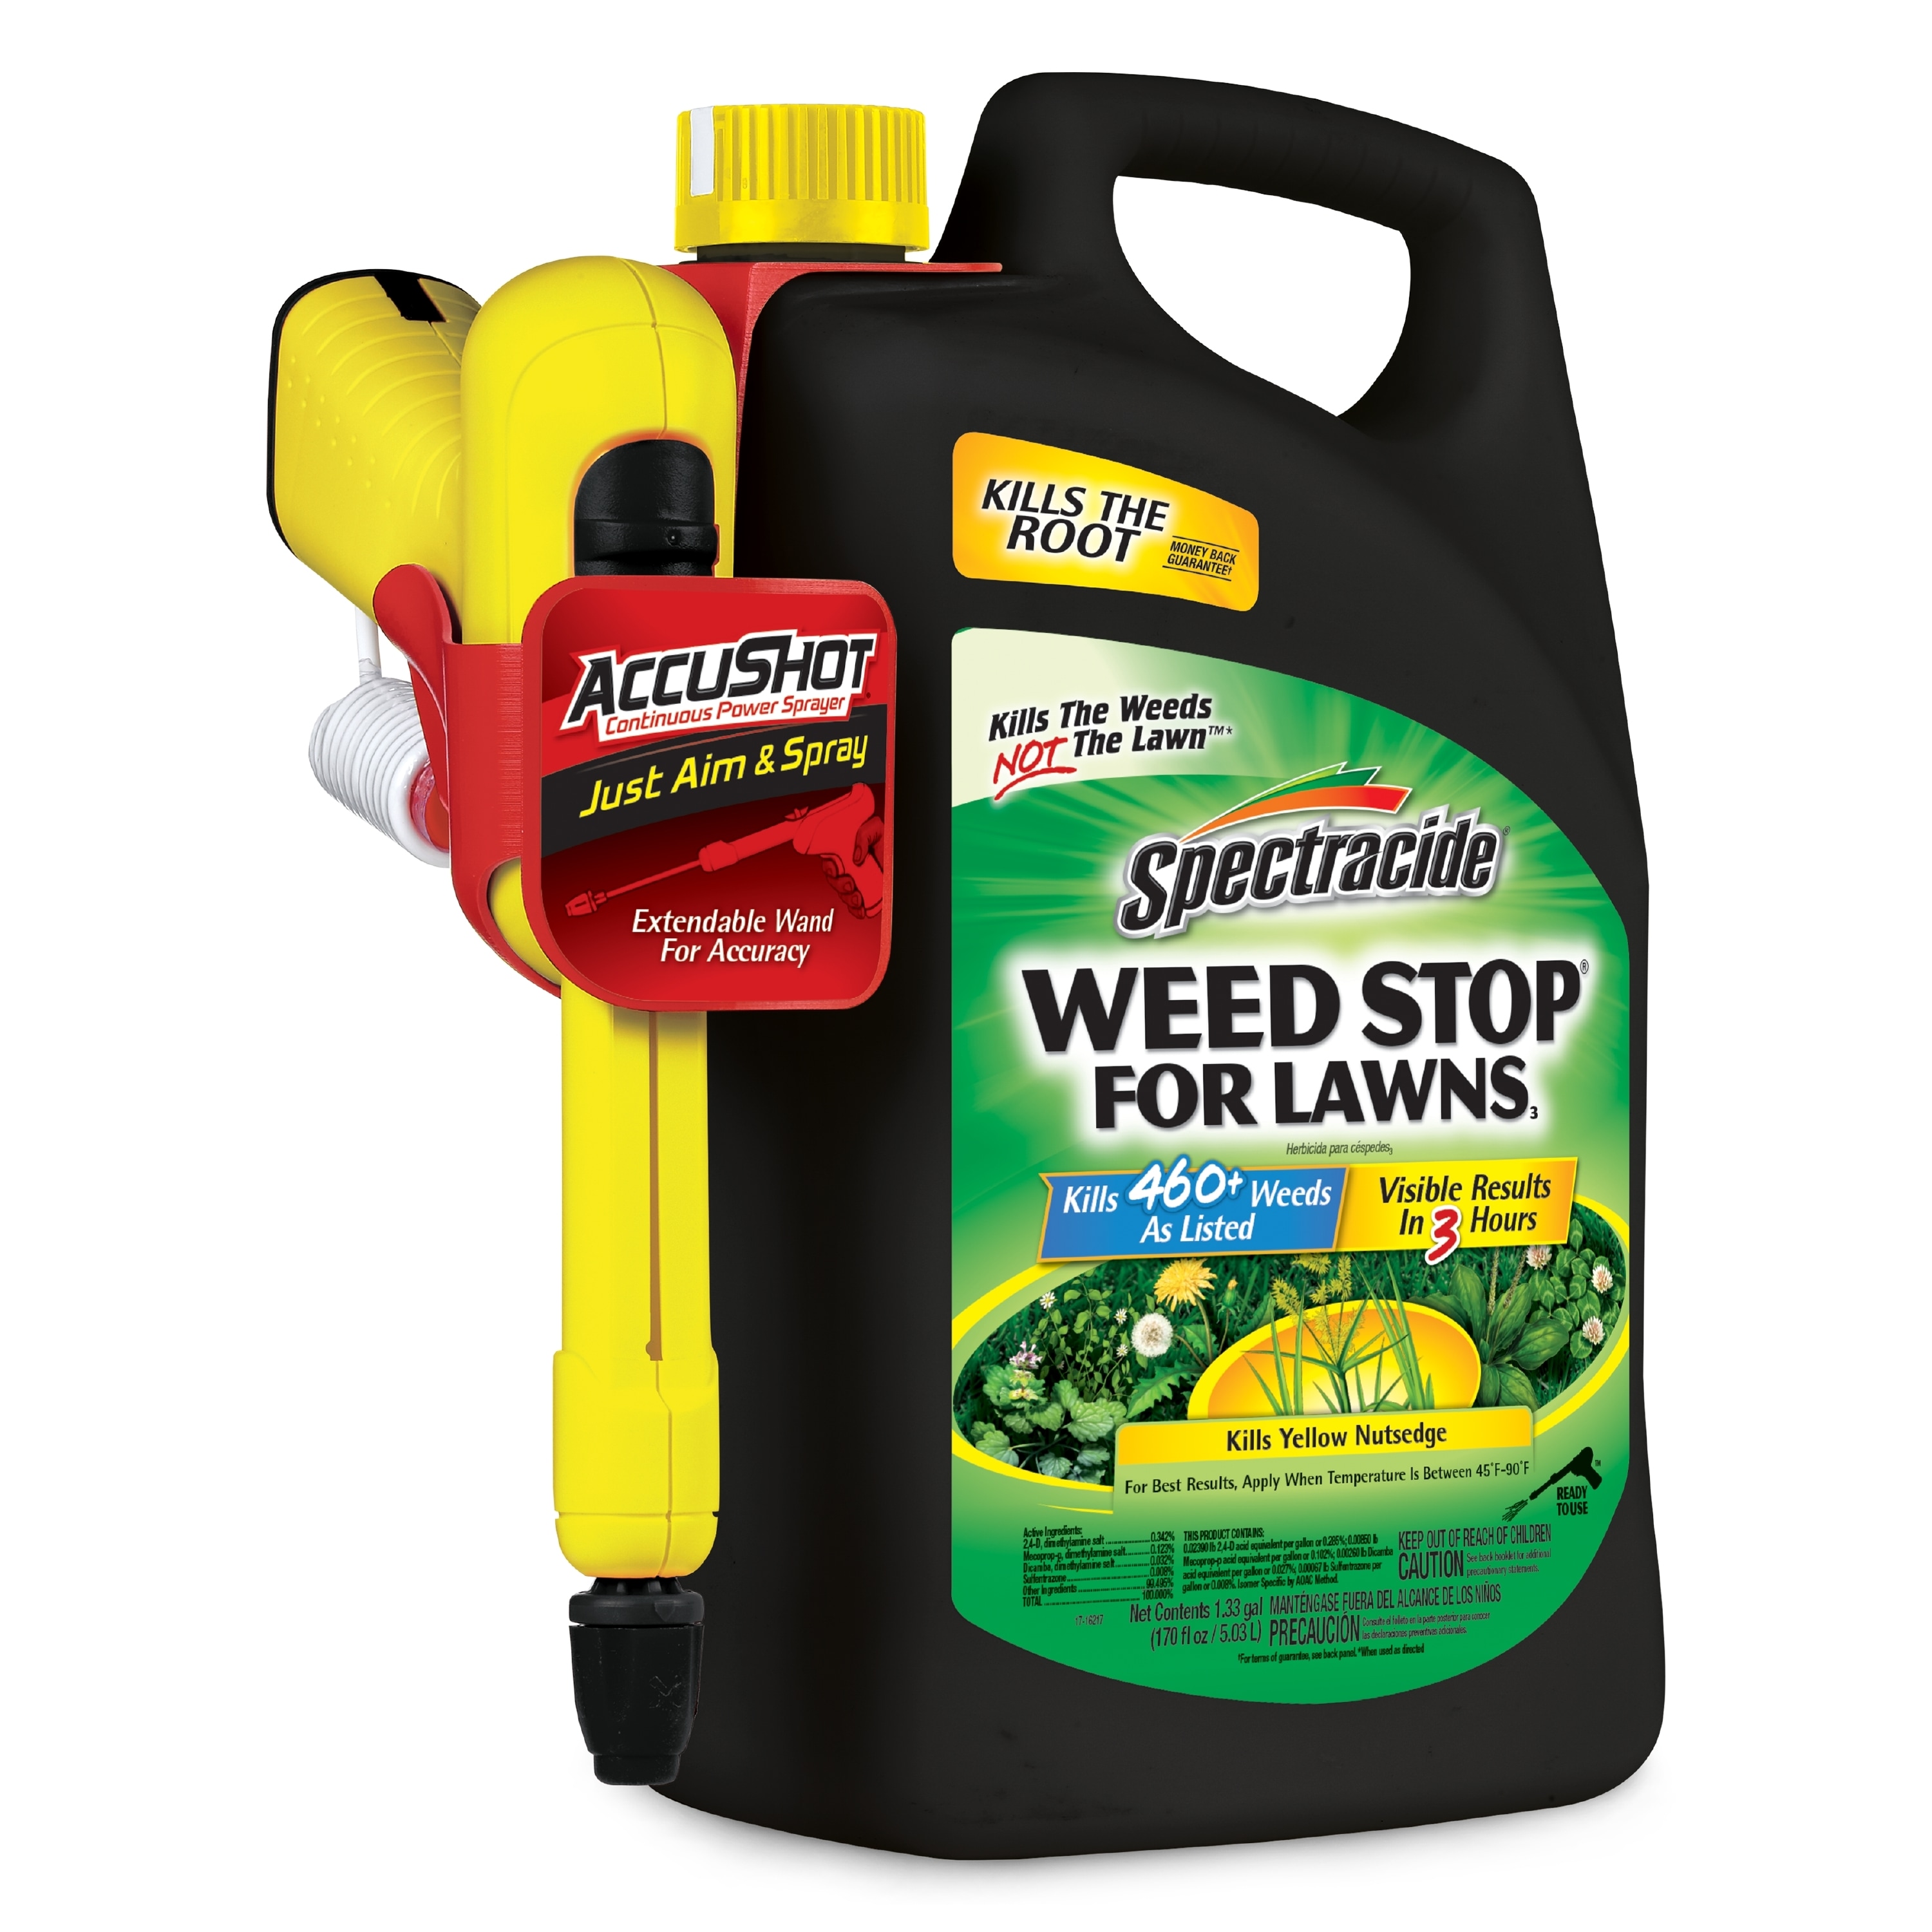 Image of Preen Weed Stopper at Lowes